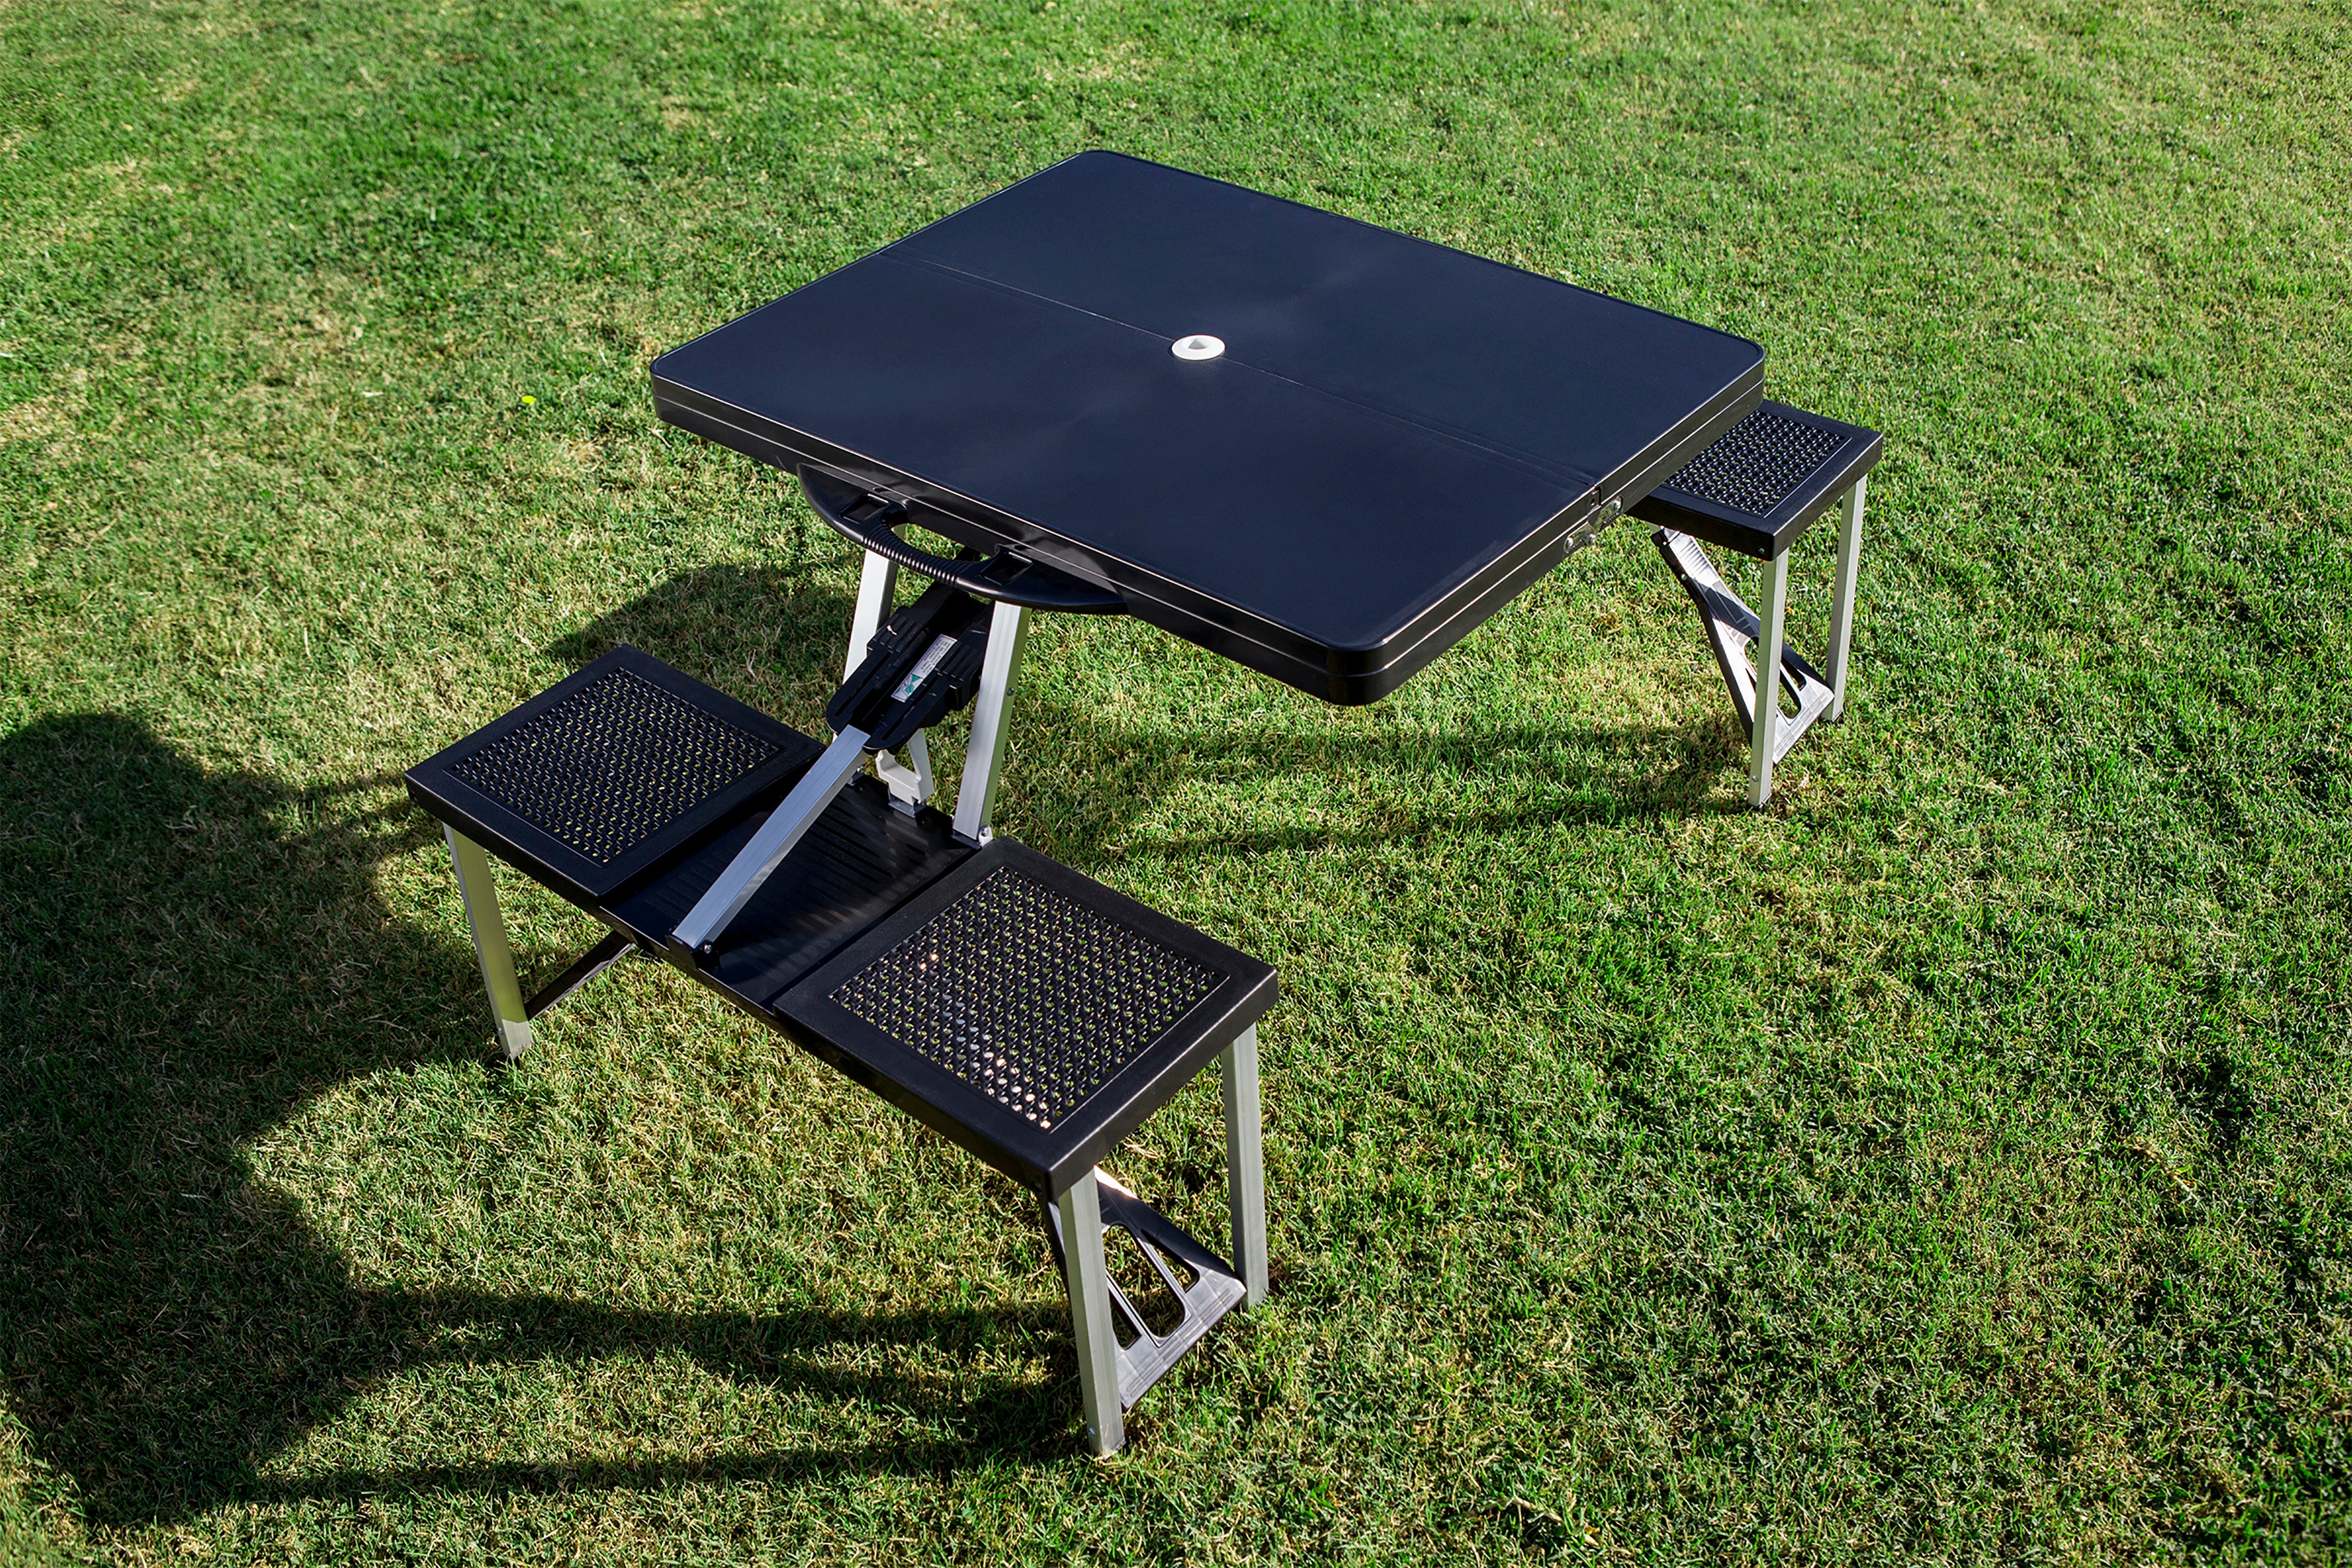 Boston College Eagles Football Field - Picnic Table Portable Folding Table with Seats